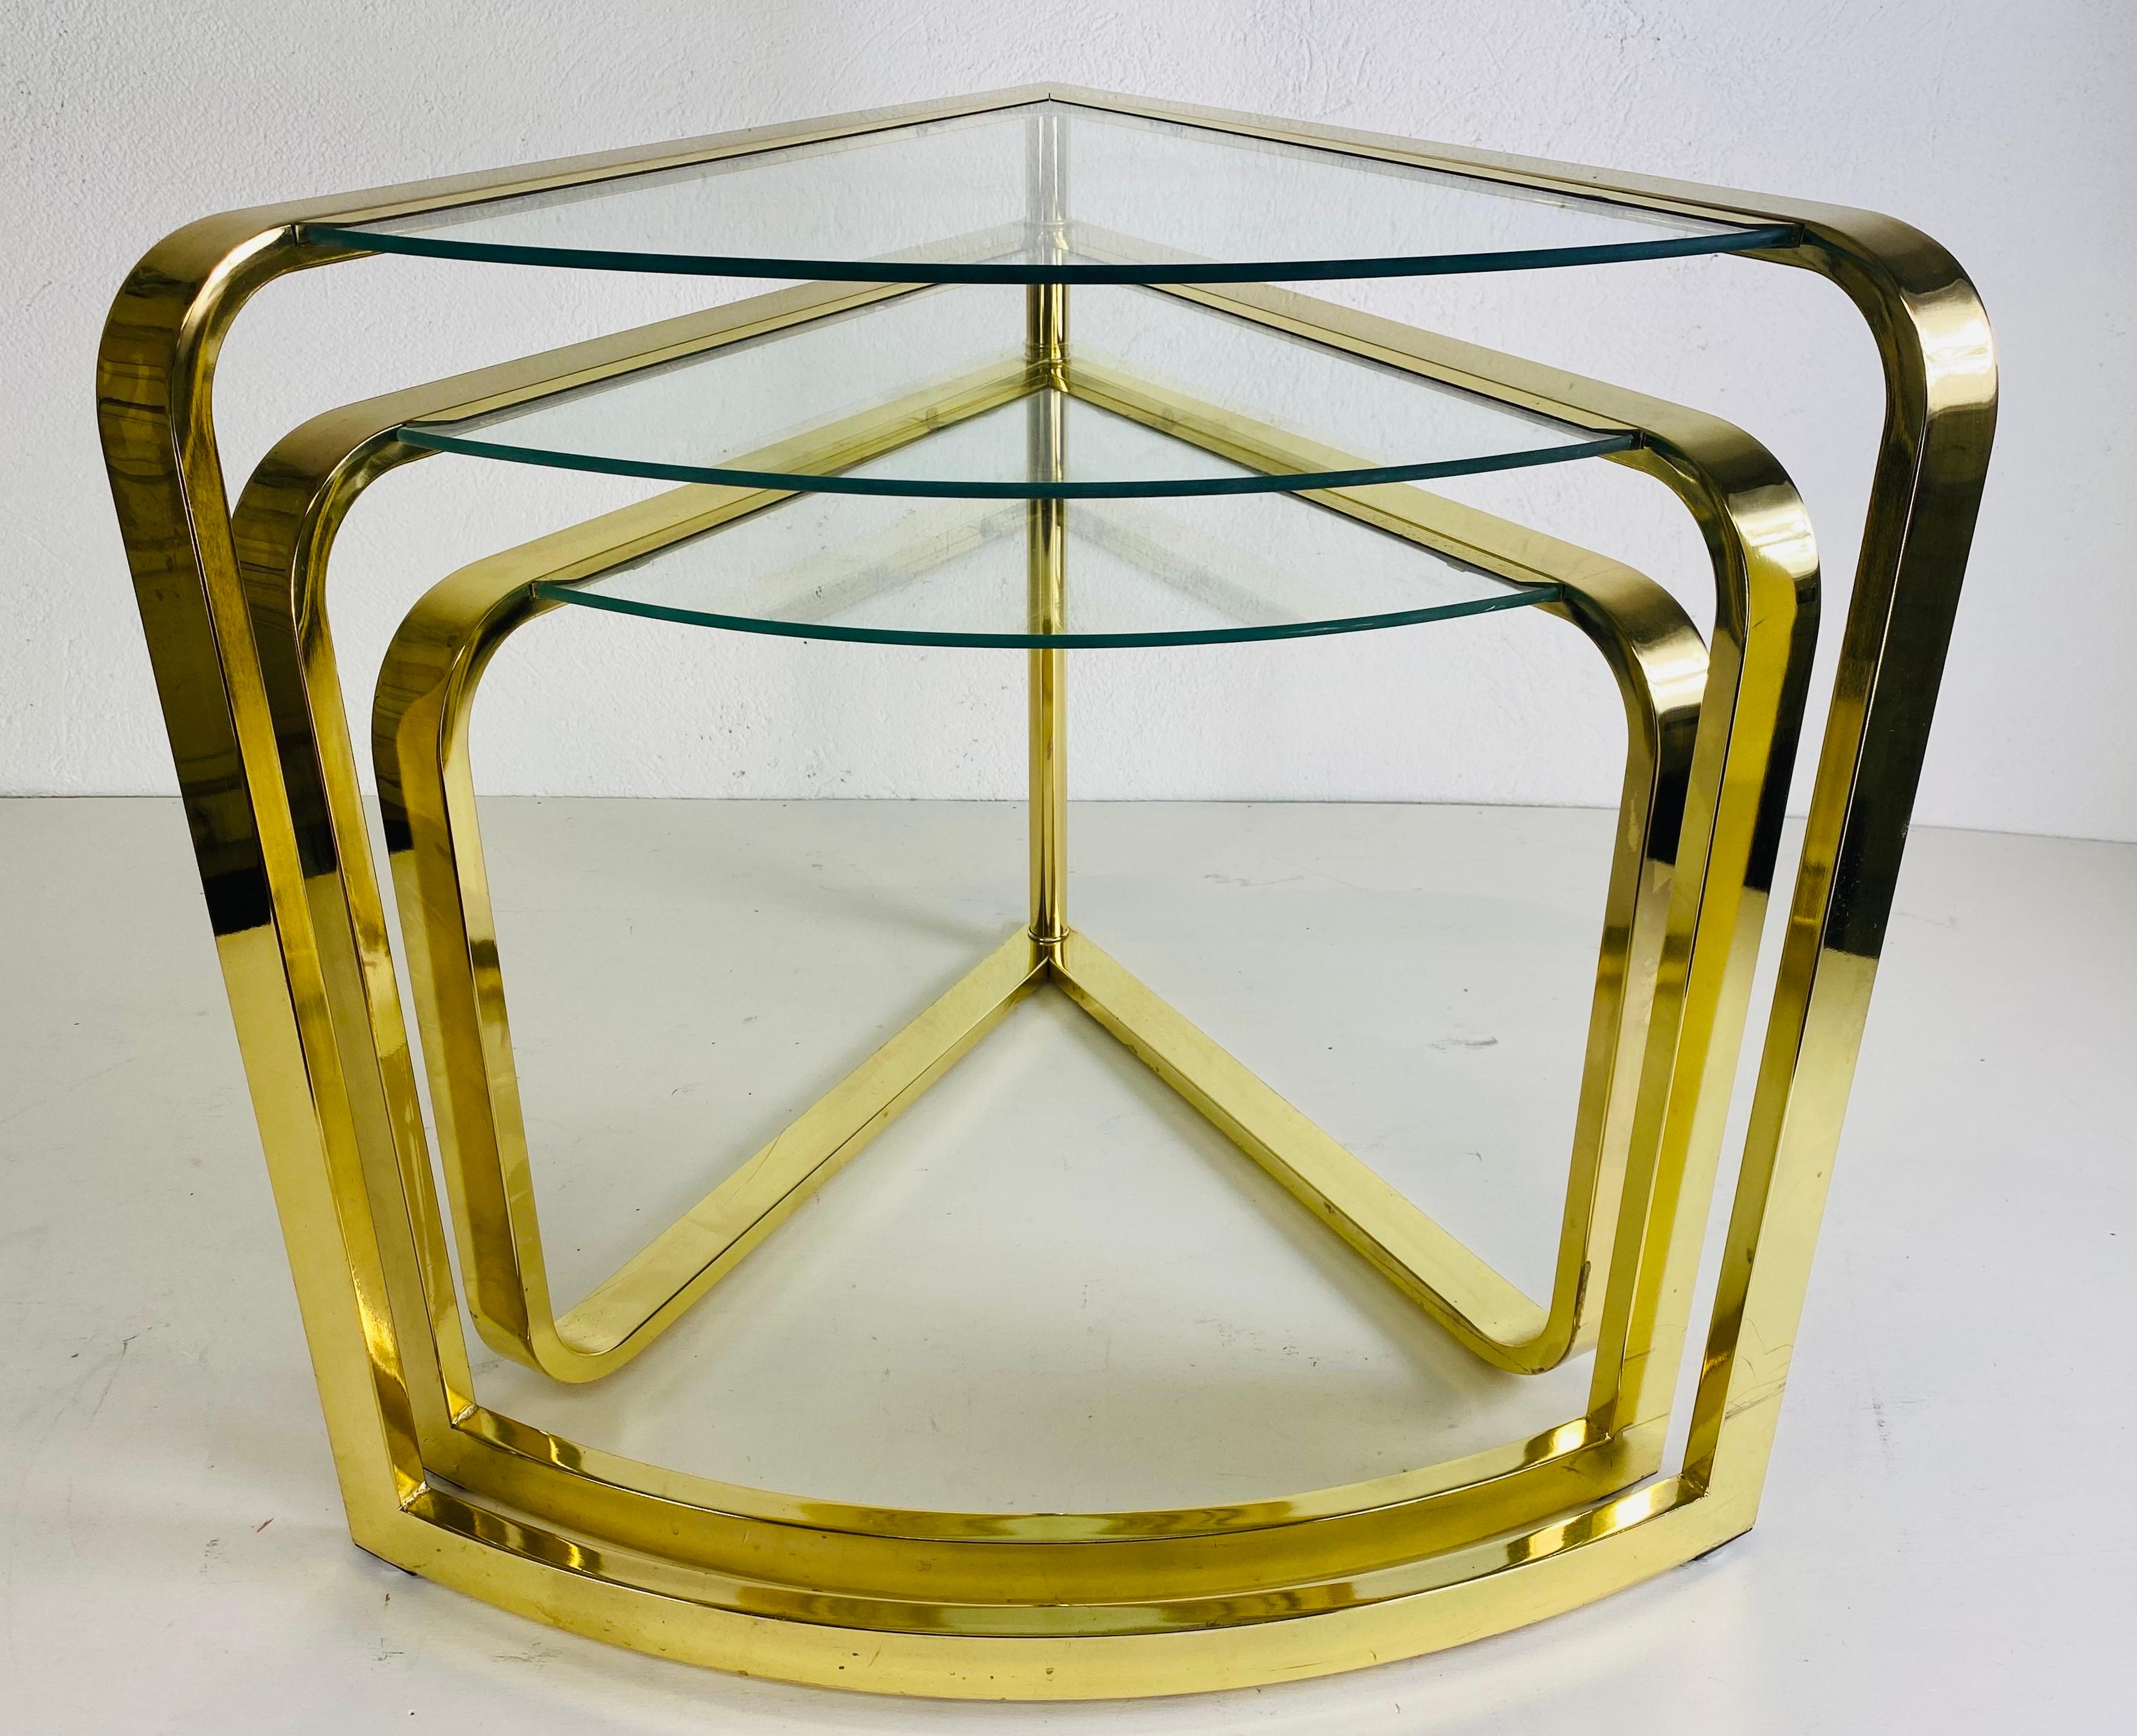 Polished Design Institute of America mid century modernist nesting tables For Sale